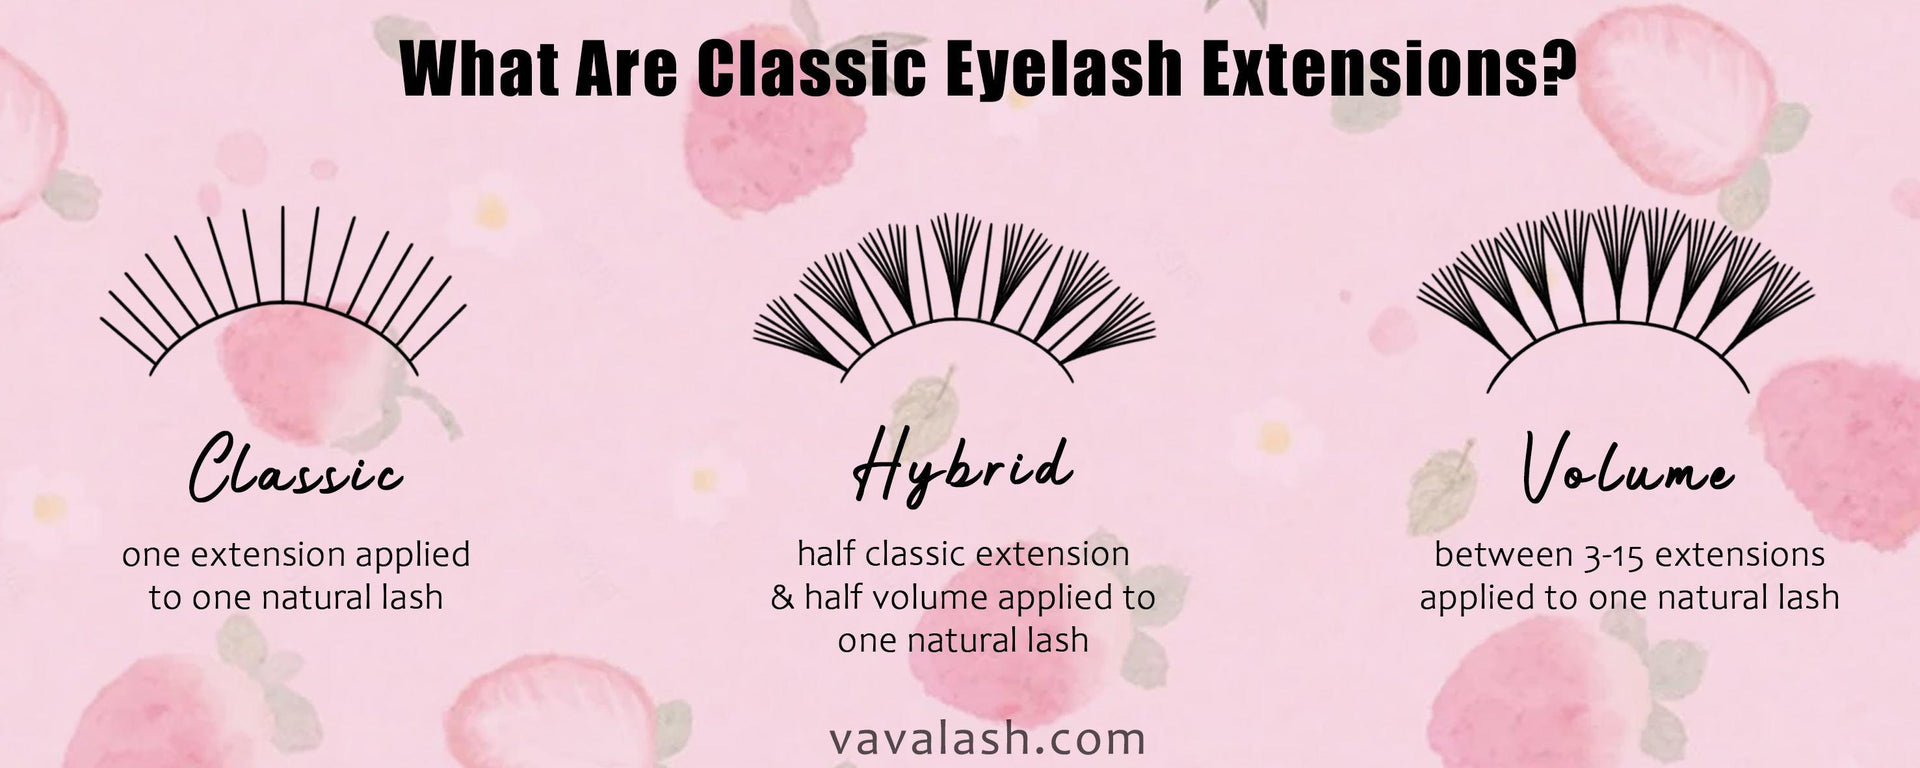 What Are Classic Eyelash Extensions? - VAVALASH